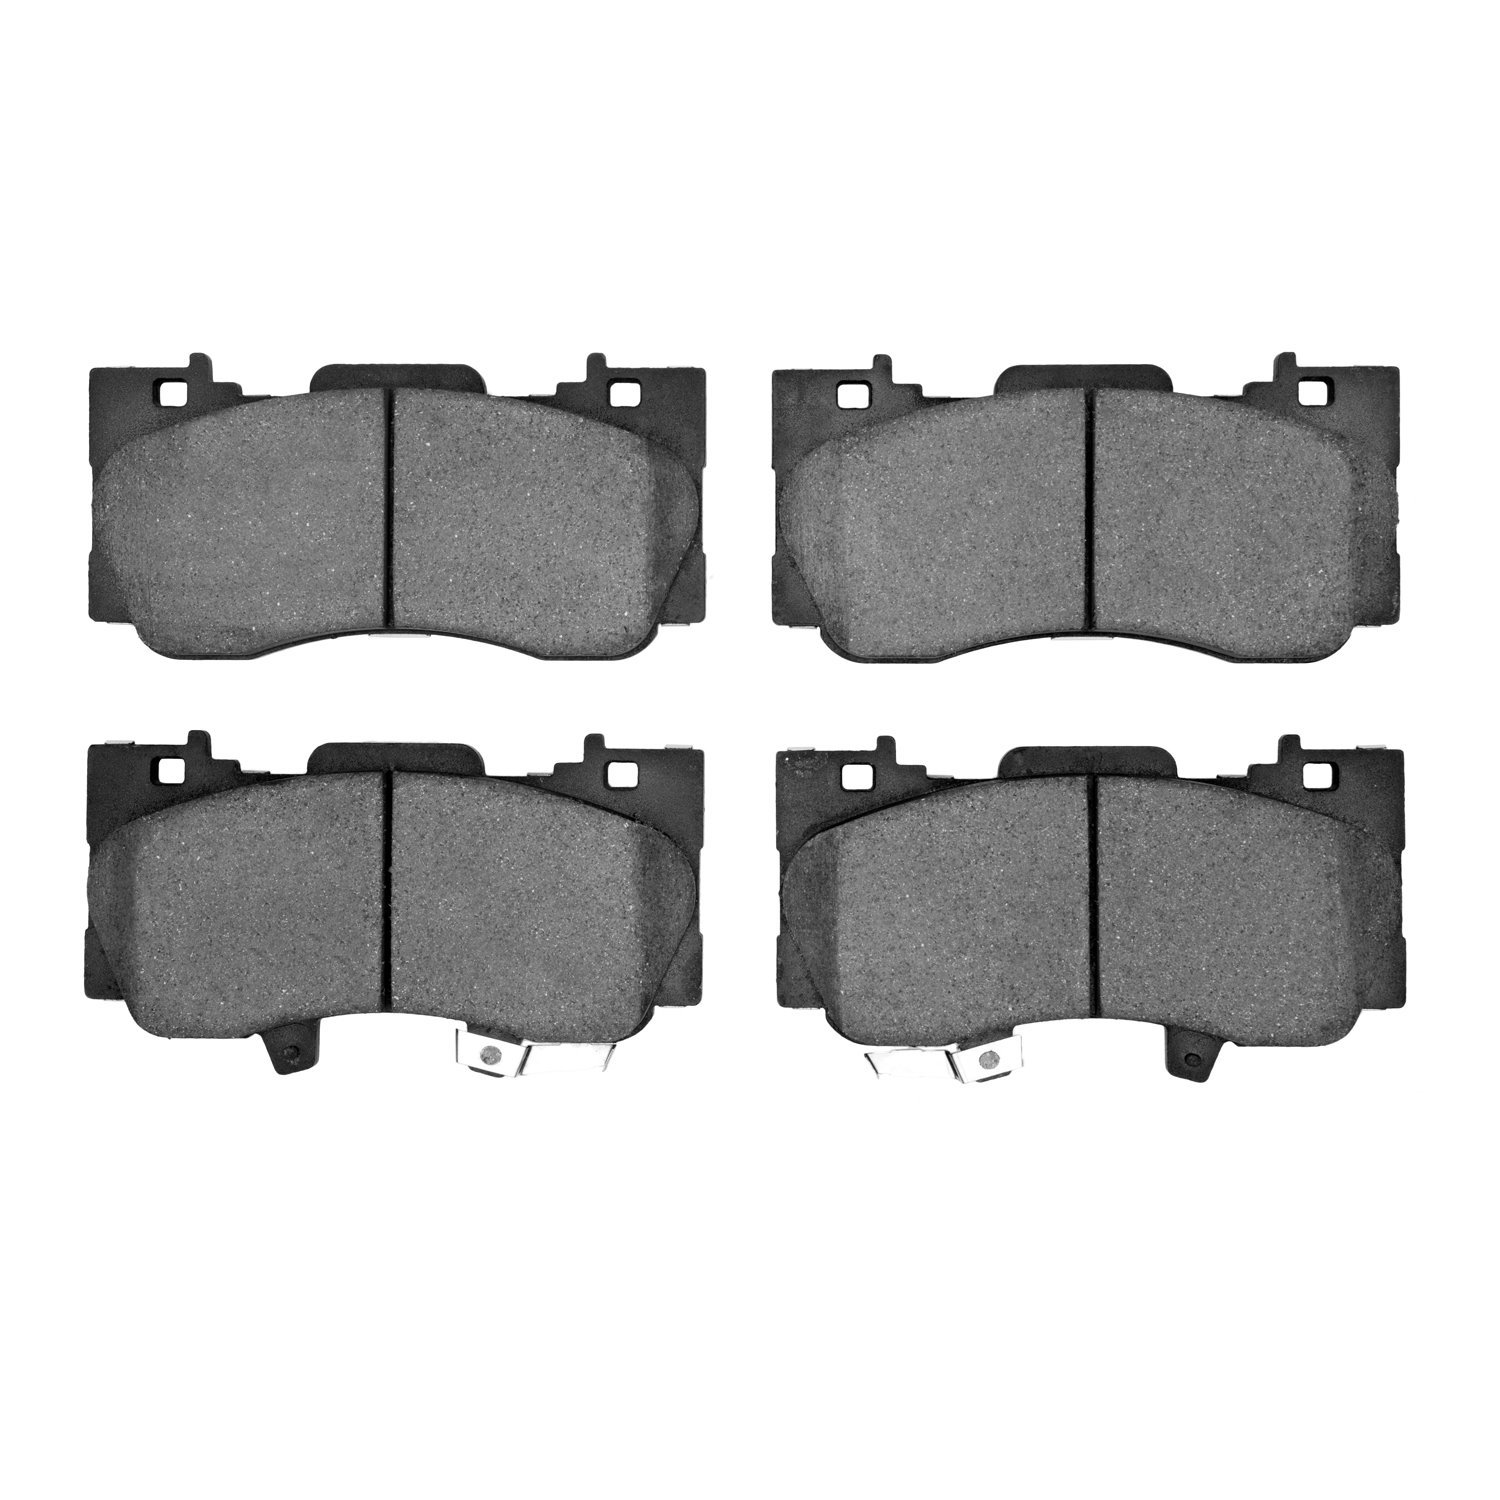 1551-1784-00 5000 Advanced Ceramic Brake Pads, Fits Select Ford/Lincoln/Mercury/Mazda, Position: Front